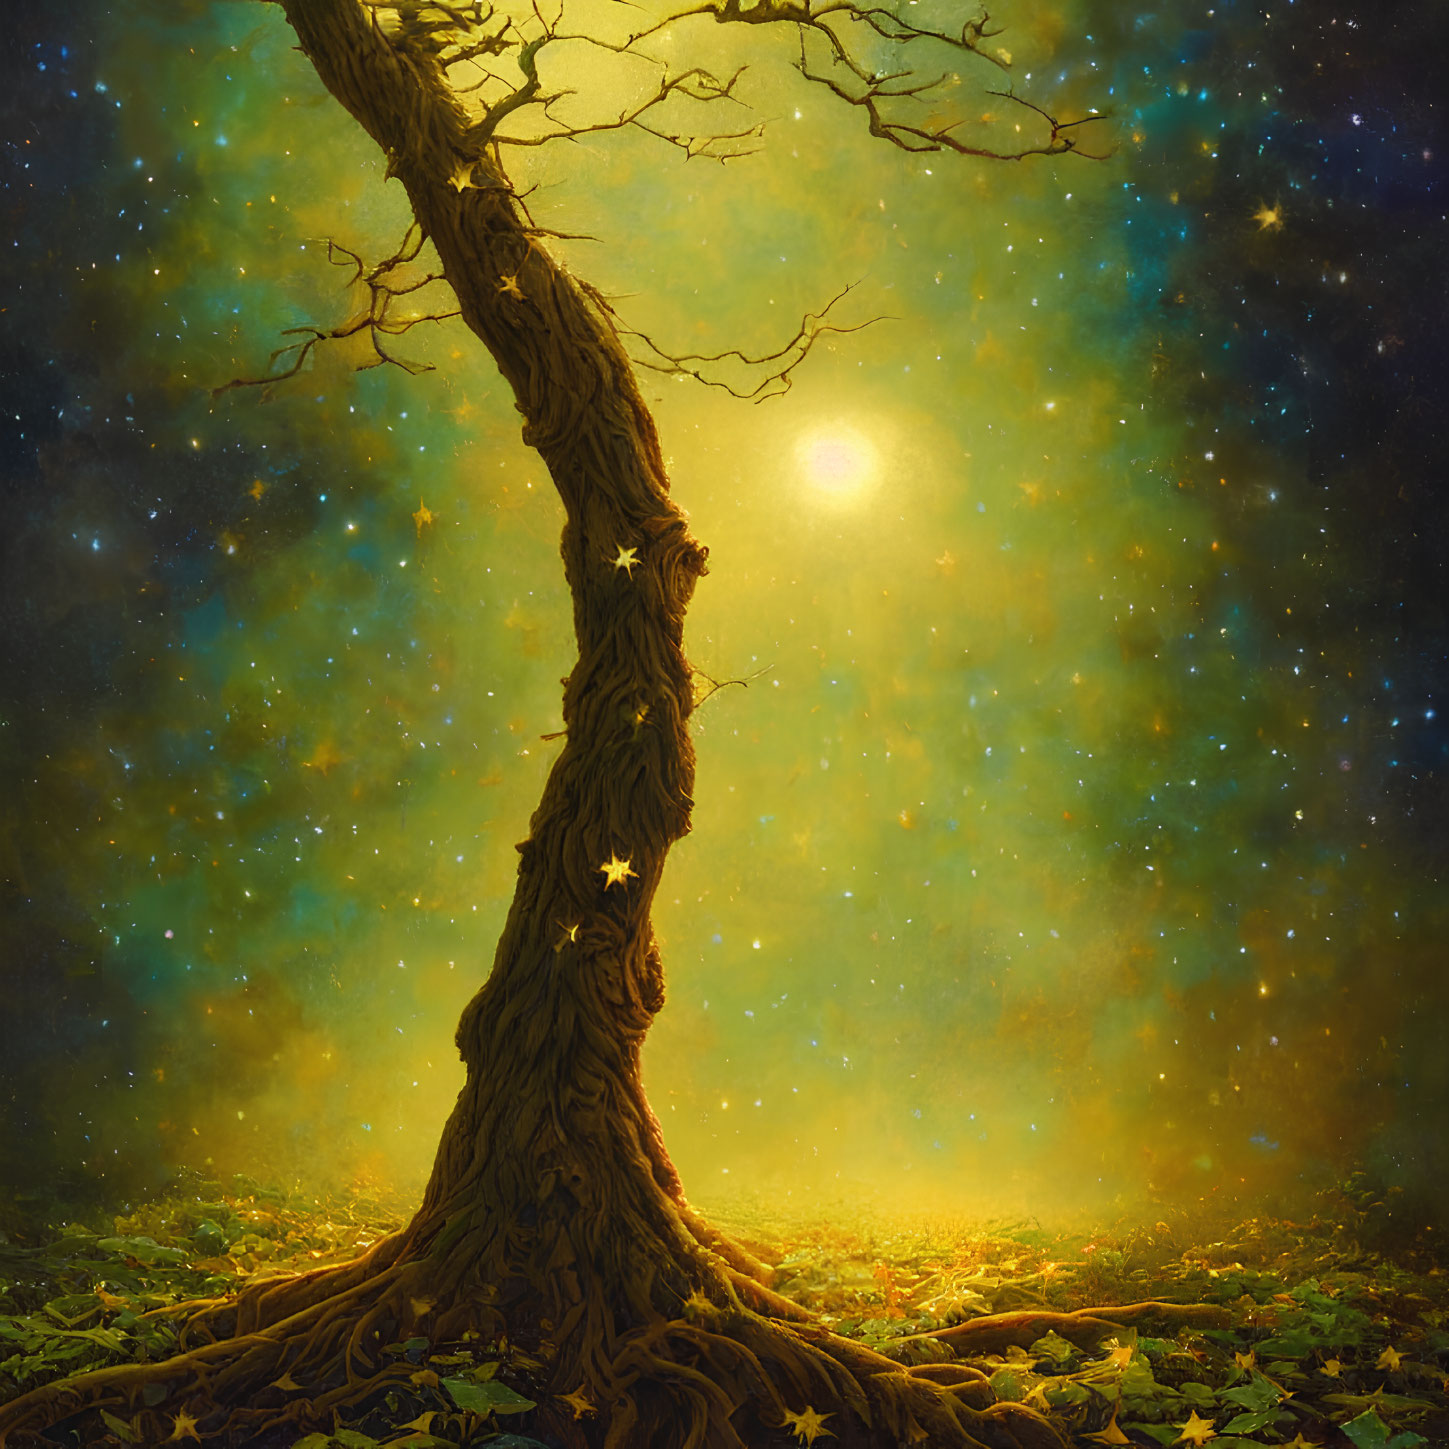 Mystical tree with star-shaped holes under starry night sky